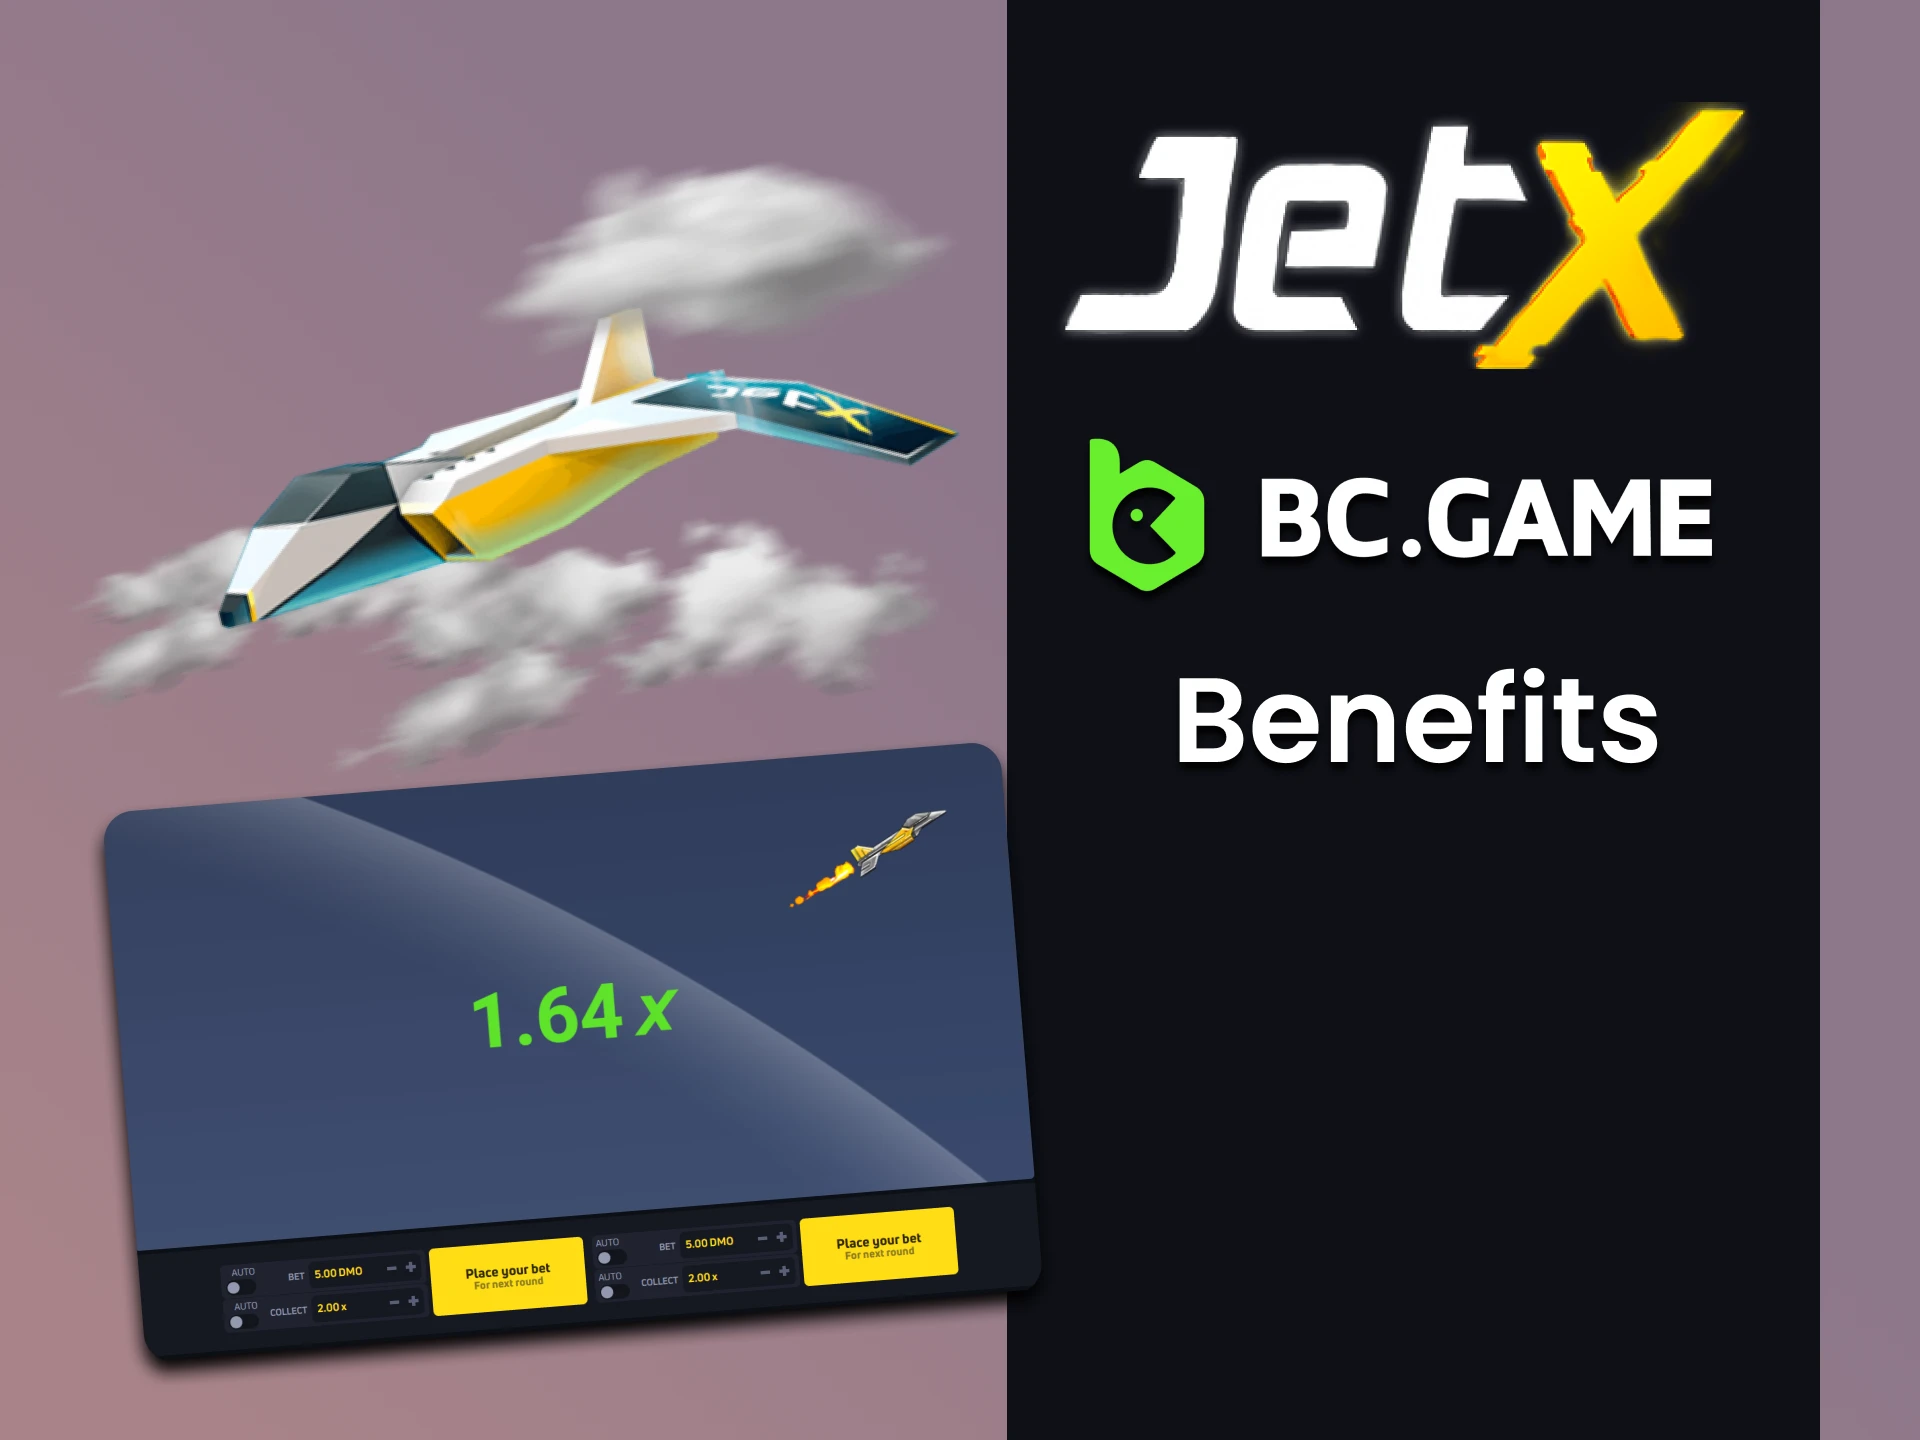 We will tell you about the benefits of BC Game for playing JetX.